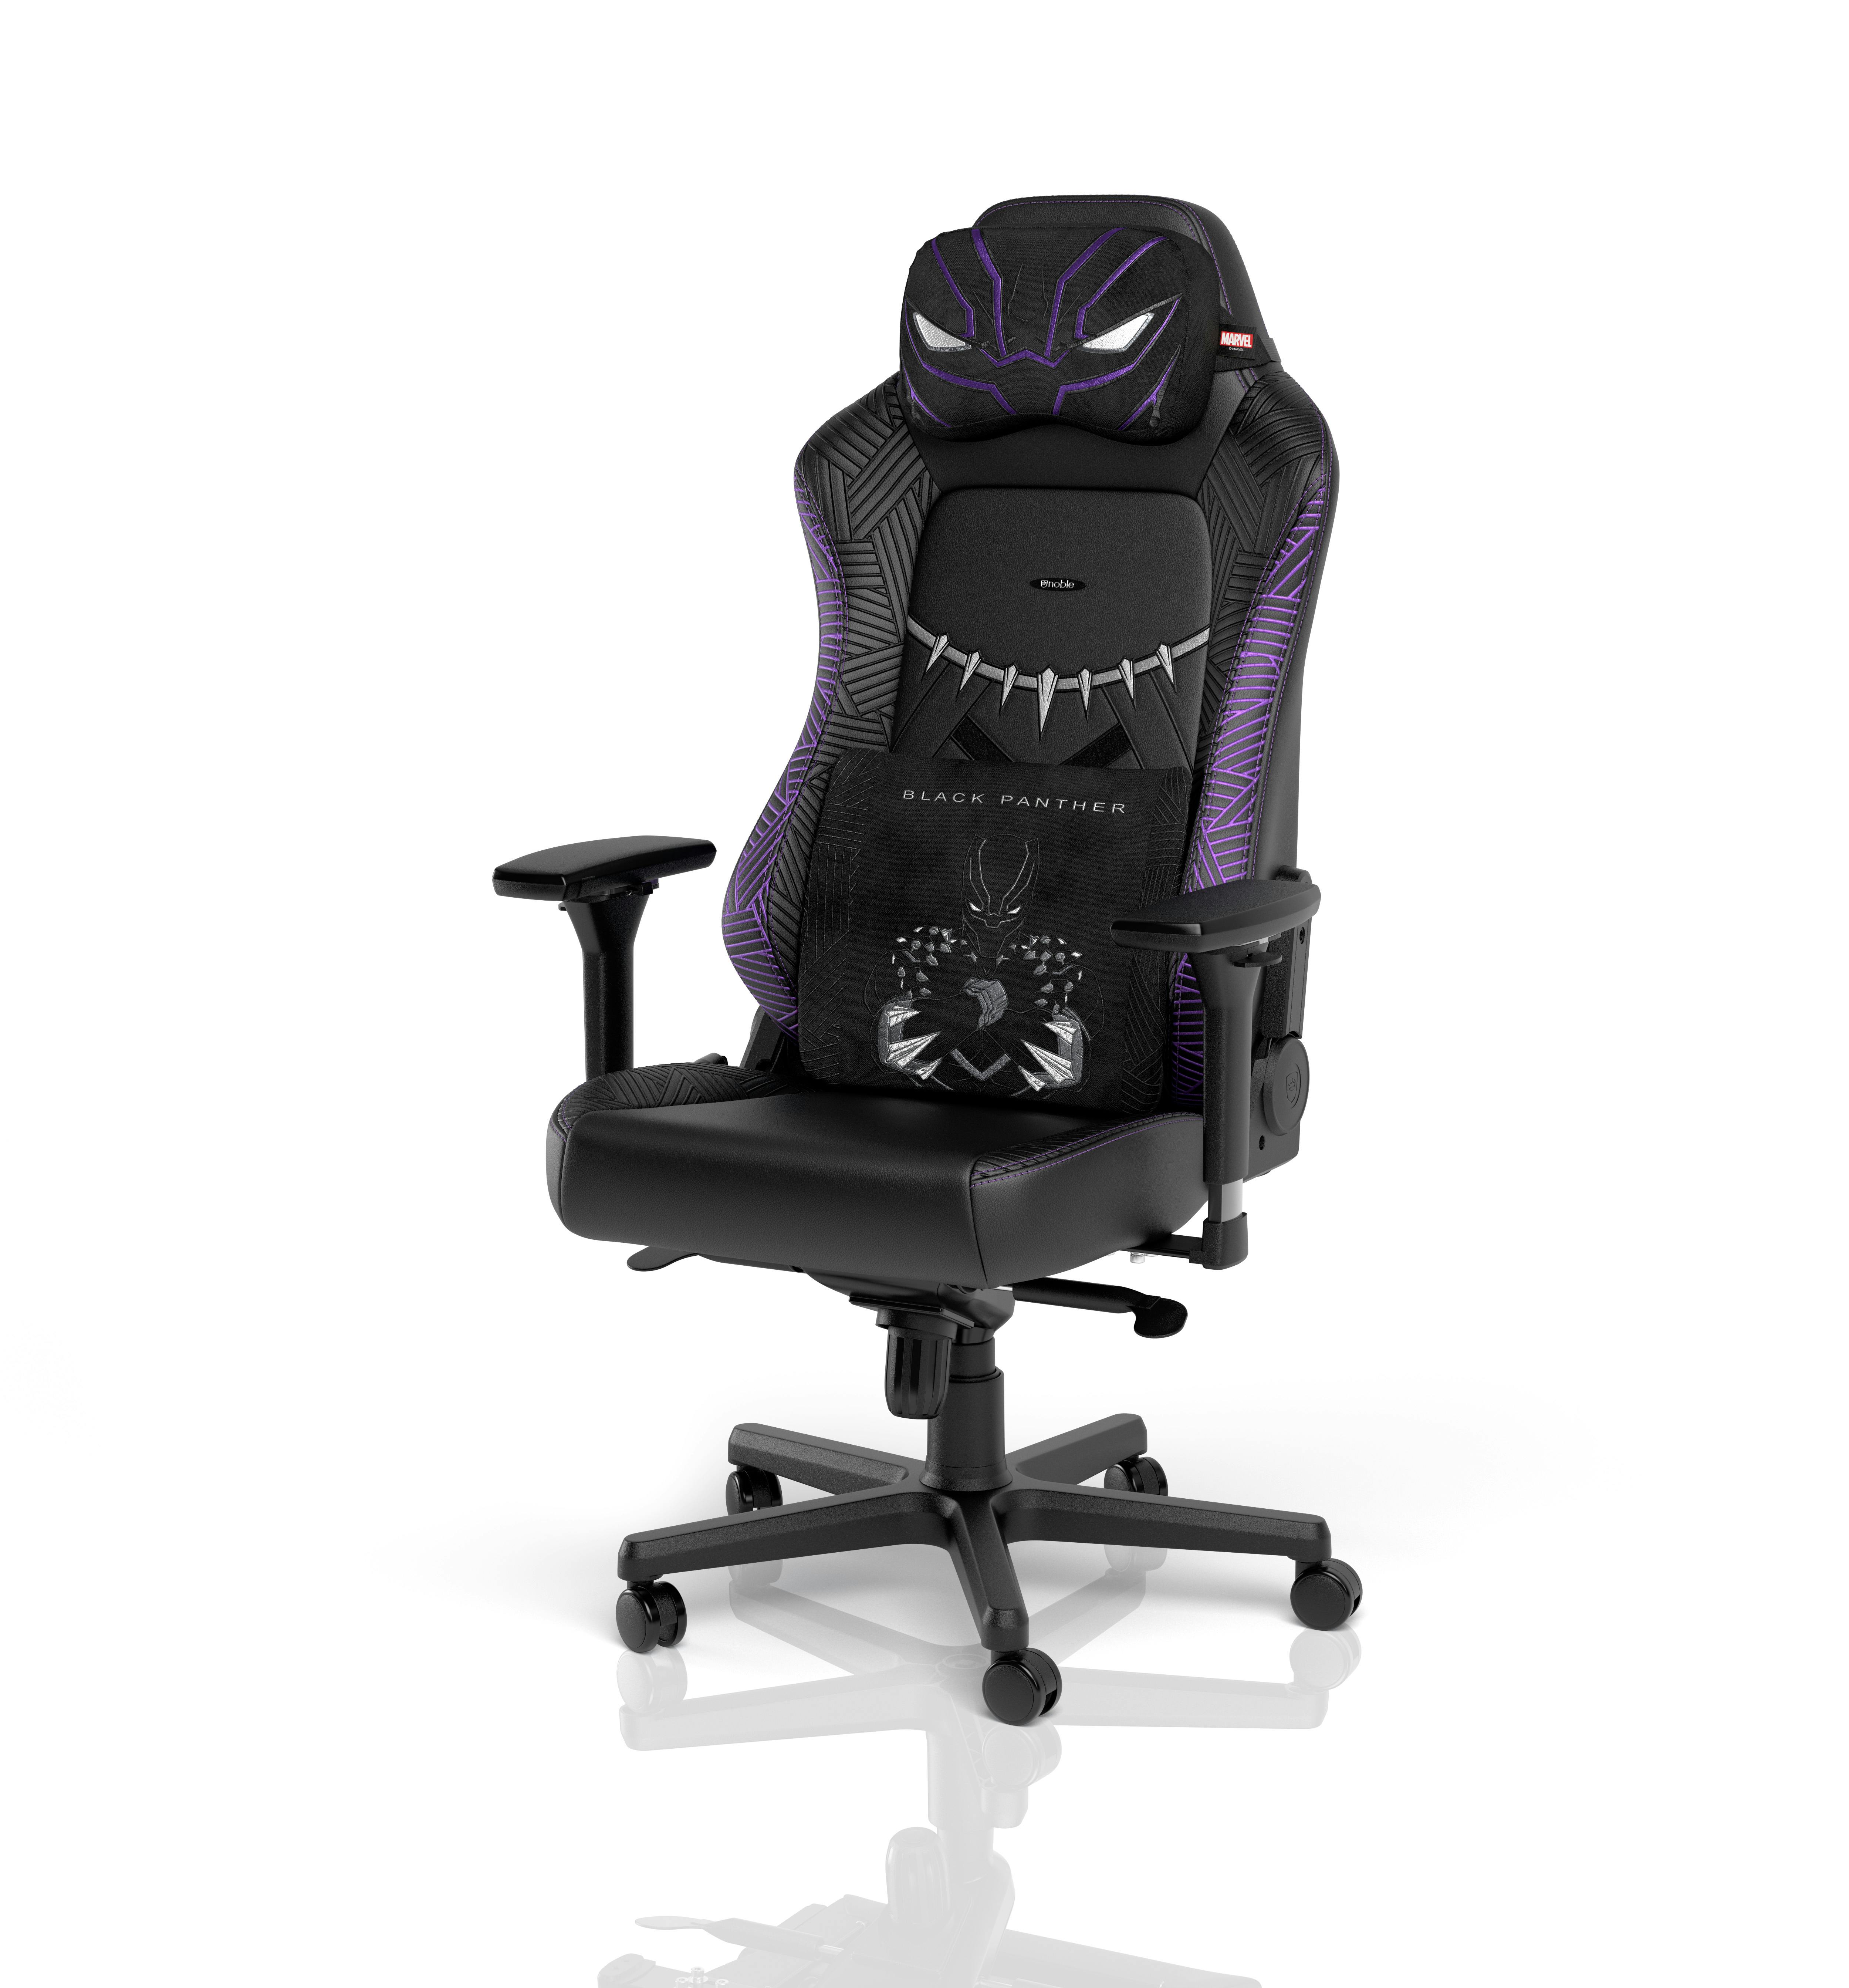 noblechairs - Memory Foam Pillow Set - Black Panther Edition